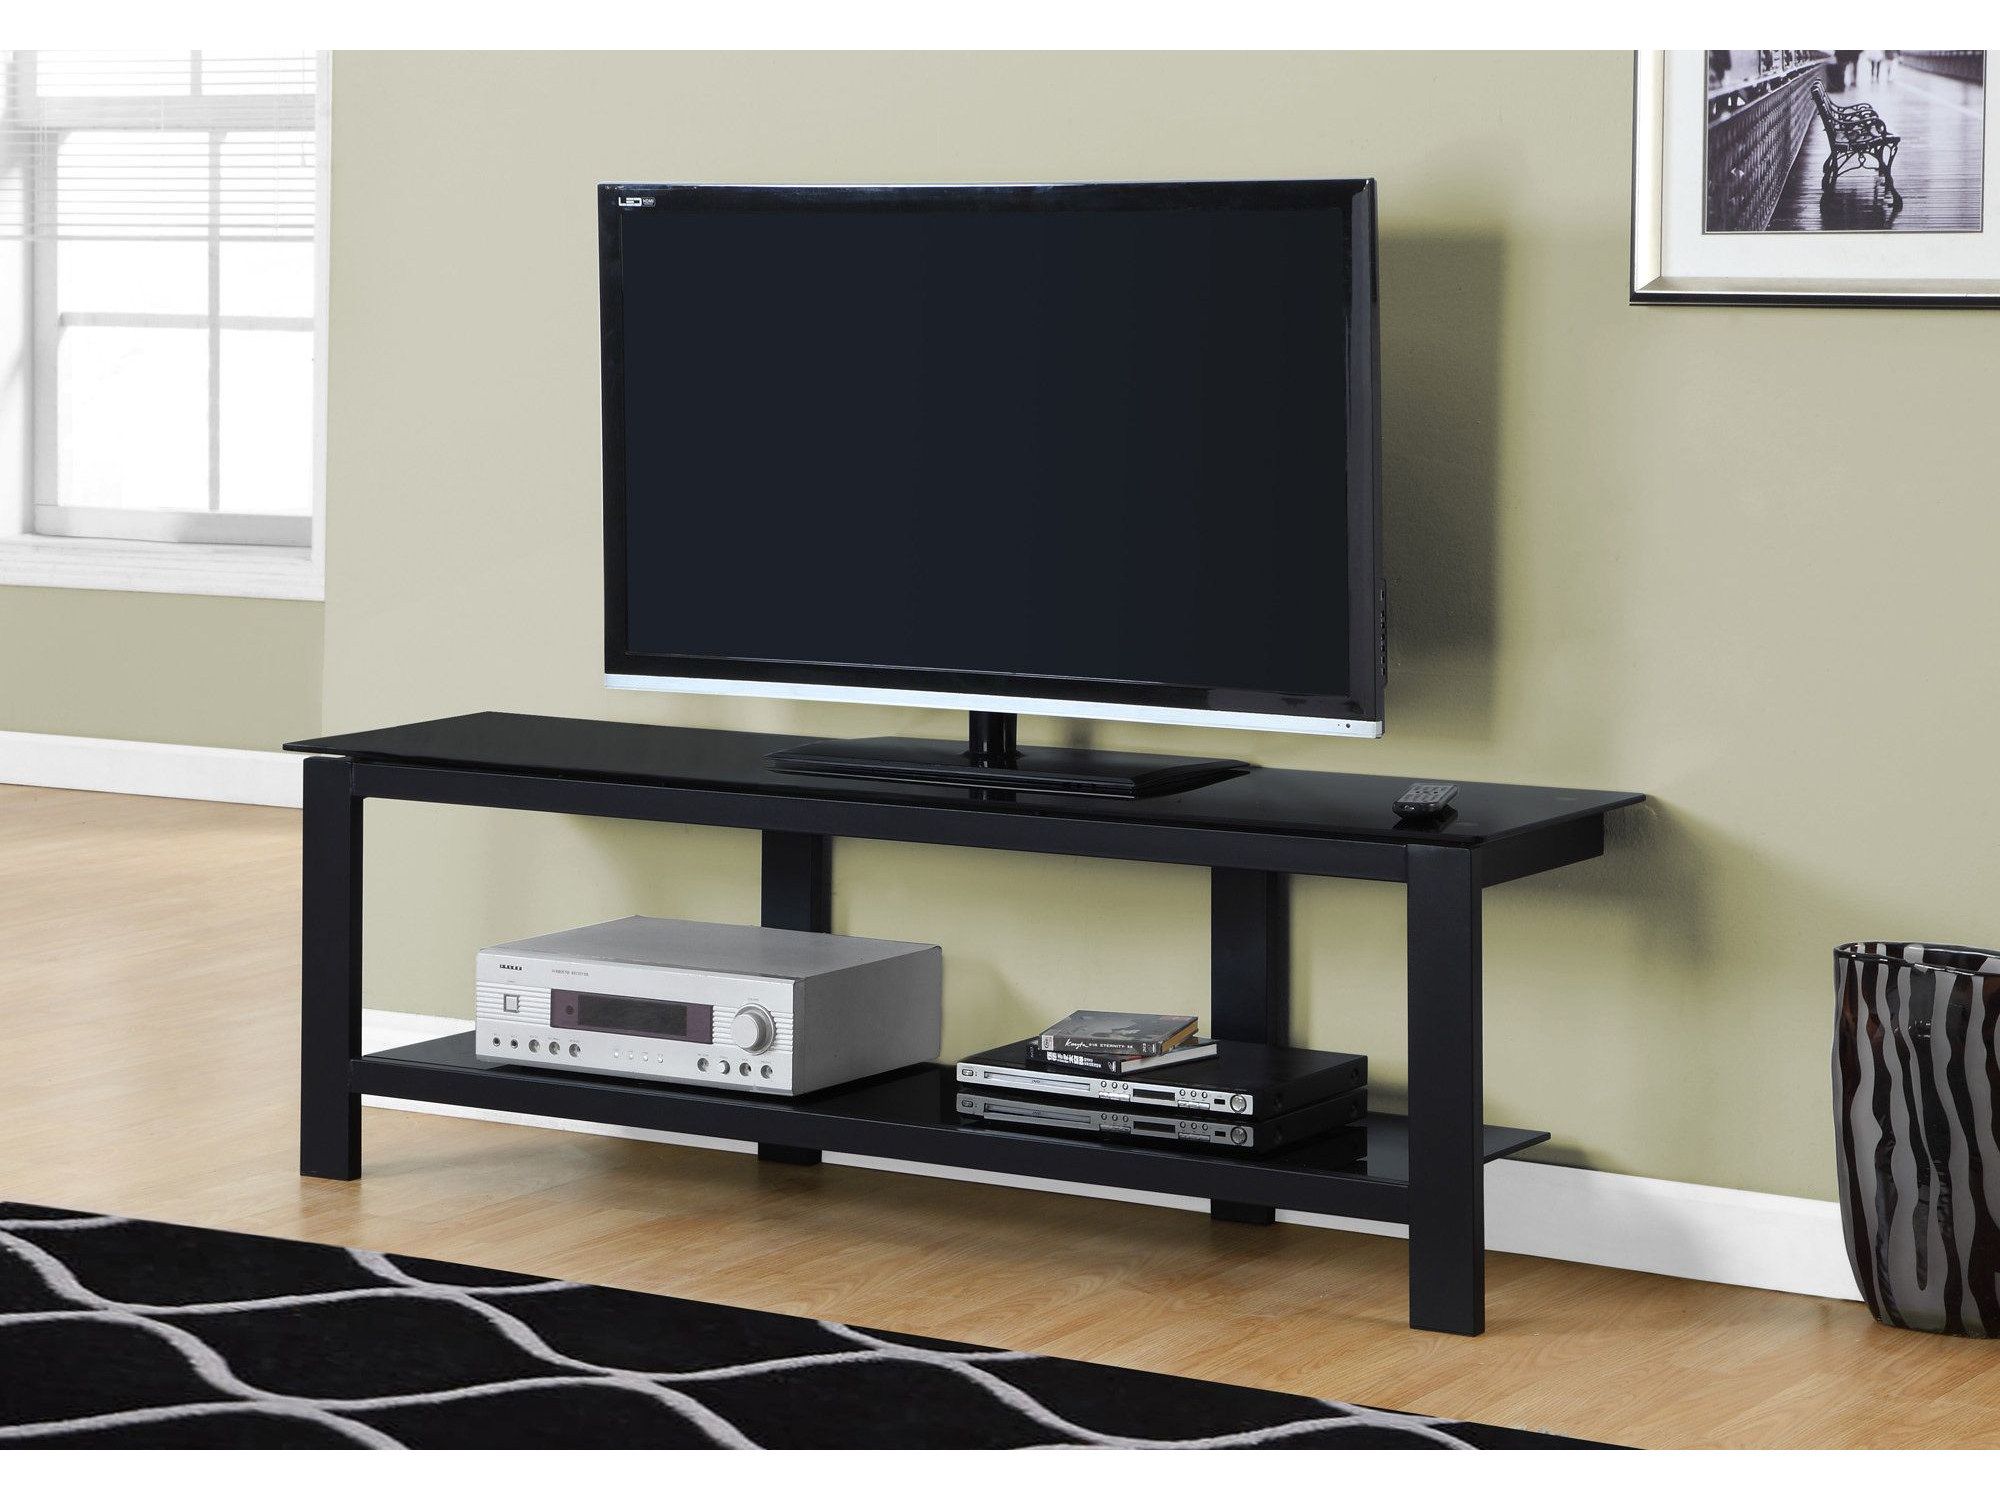 Tv Stand | Nothin' Fancy Furniture Warehouse With Fancy Tv Cabinets (View 2 of 15)